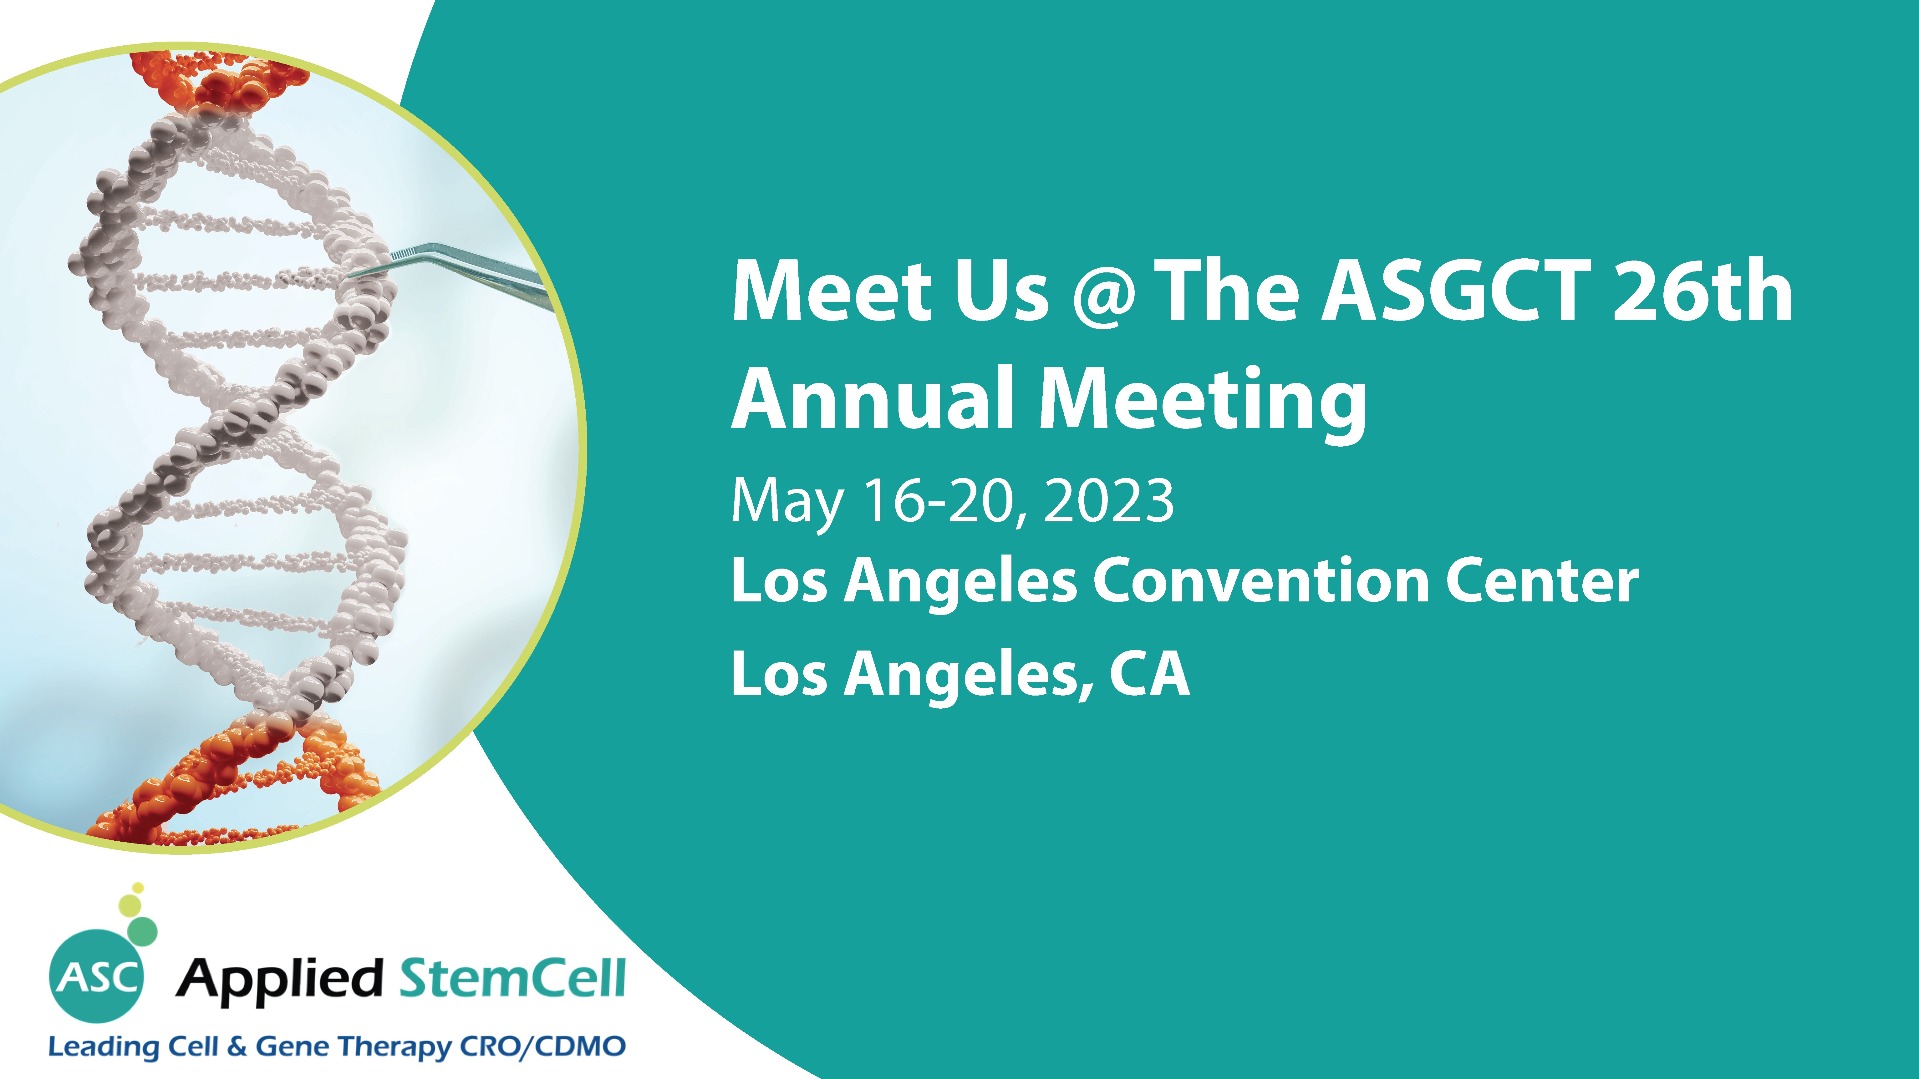 Meet Our Team At The ASGCT 26th Annual Meeting; May 16-20, 2023| ASC